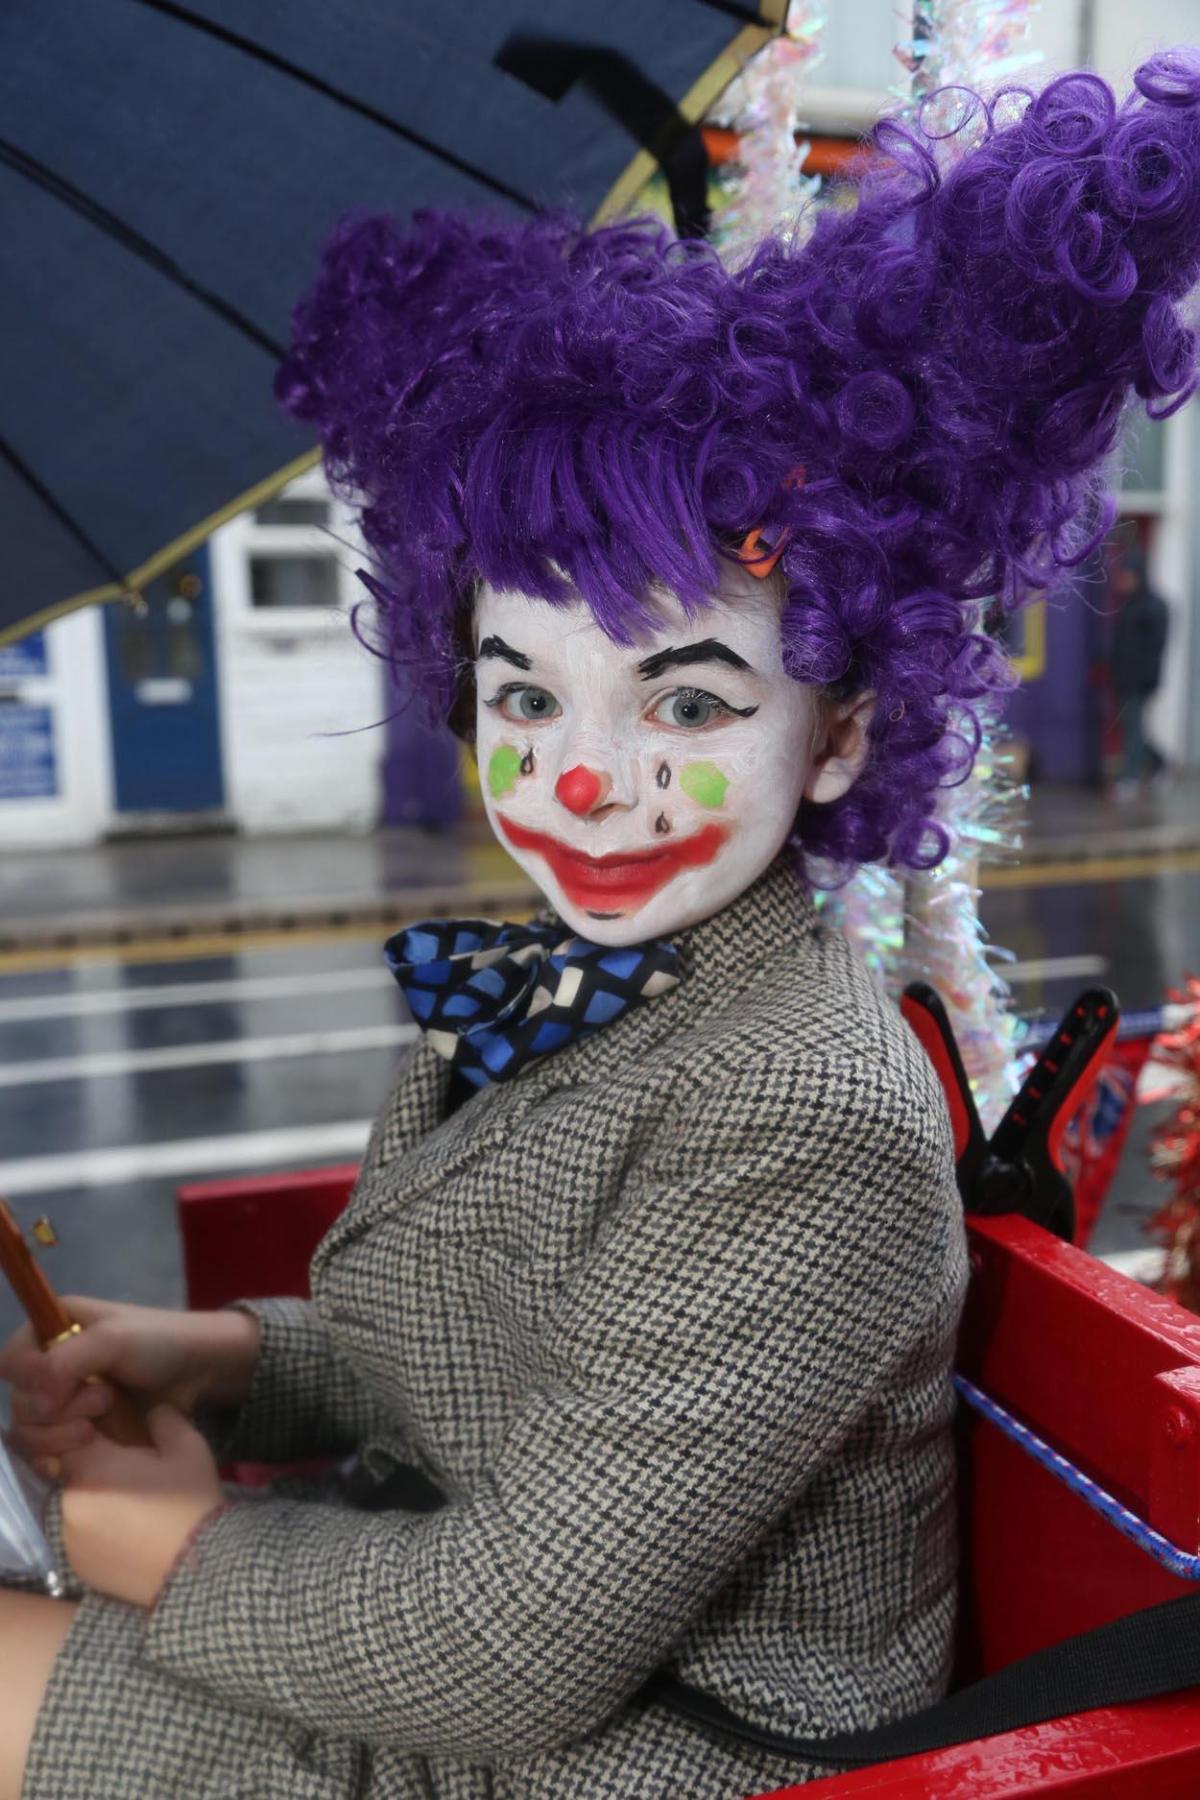 All our images from Boscombe's Christmas Carnival 2014